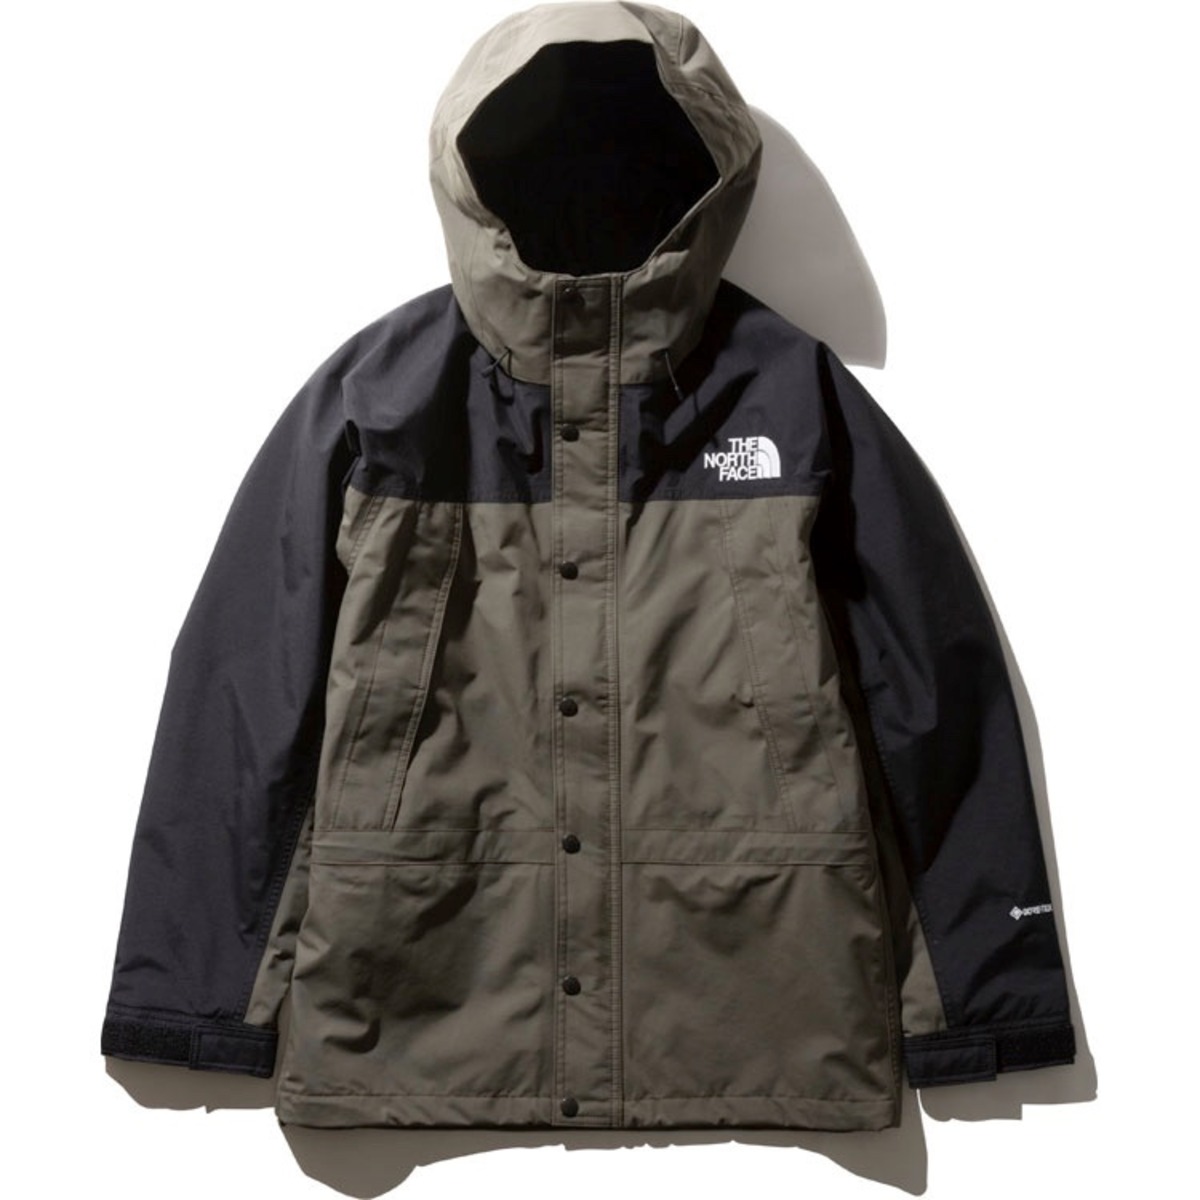 THE NORTH FACE / MOUNTAIN LIGHT JACKET（20AW） | st. valley house - セントバレーハウス